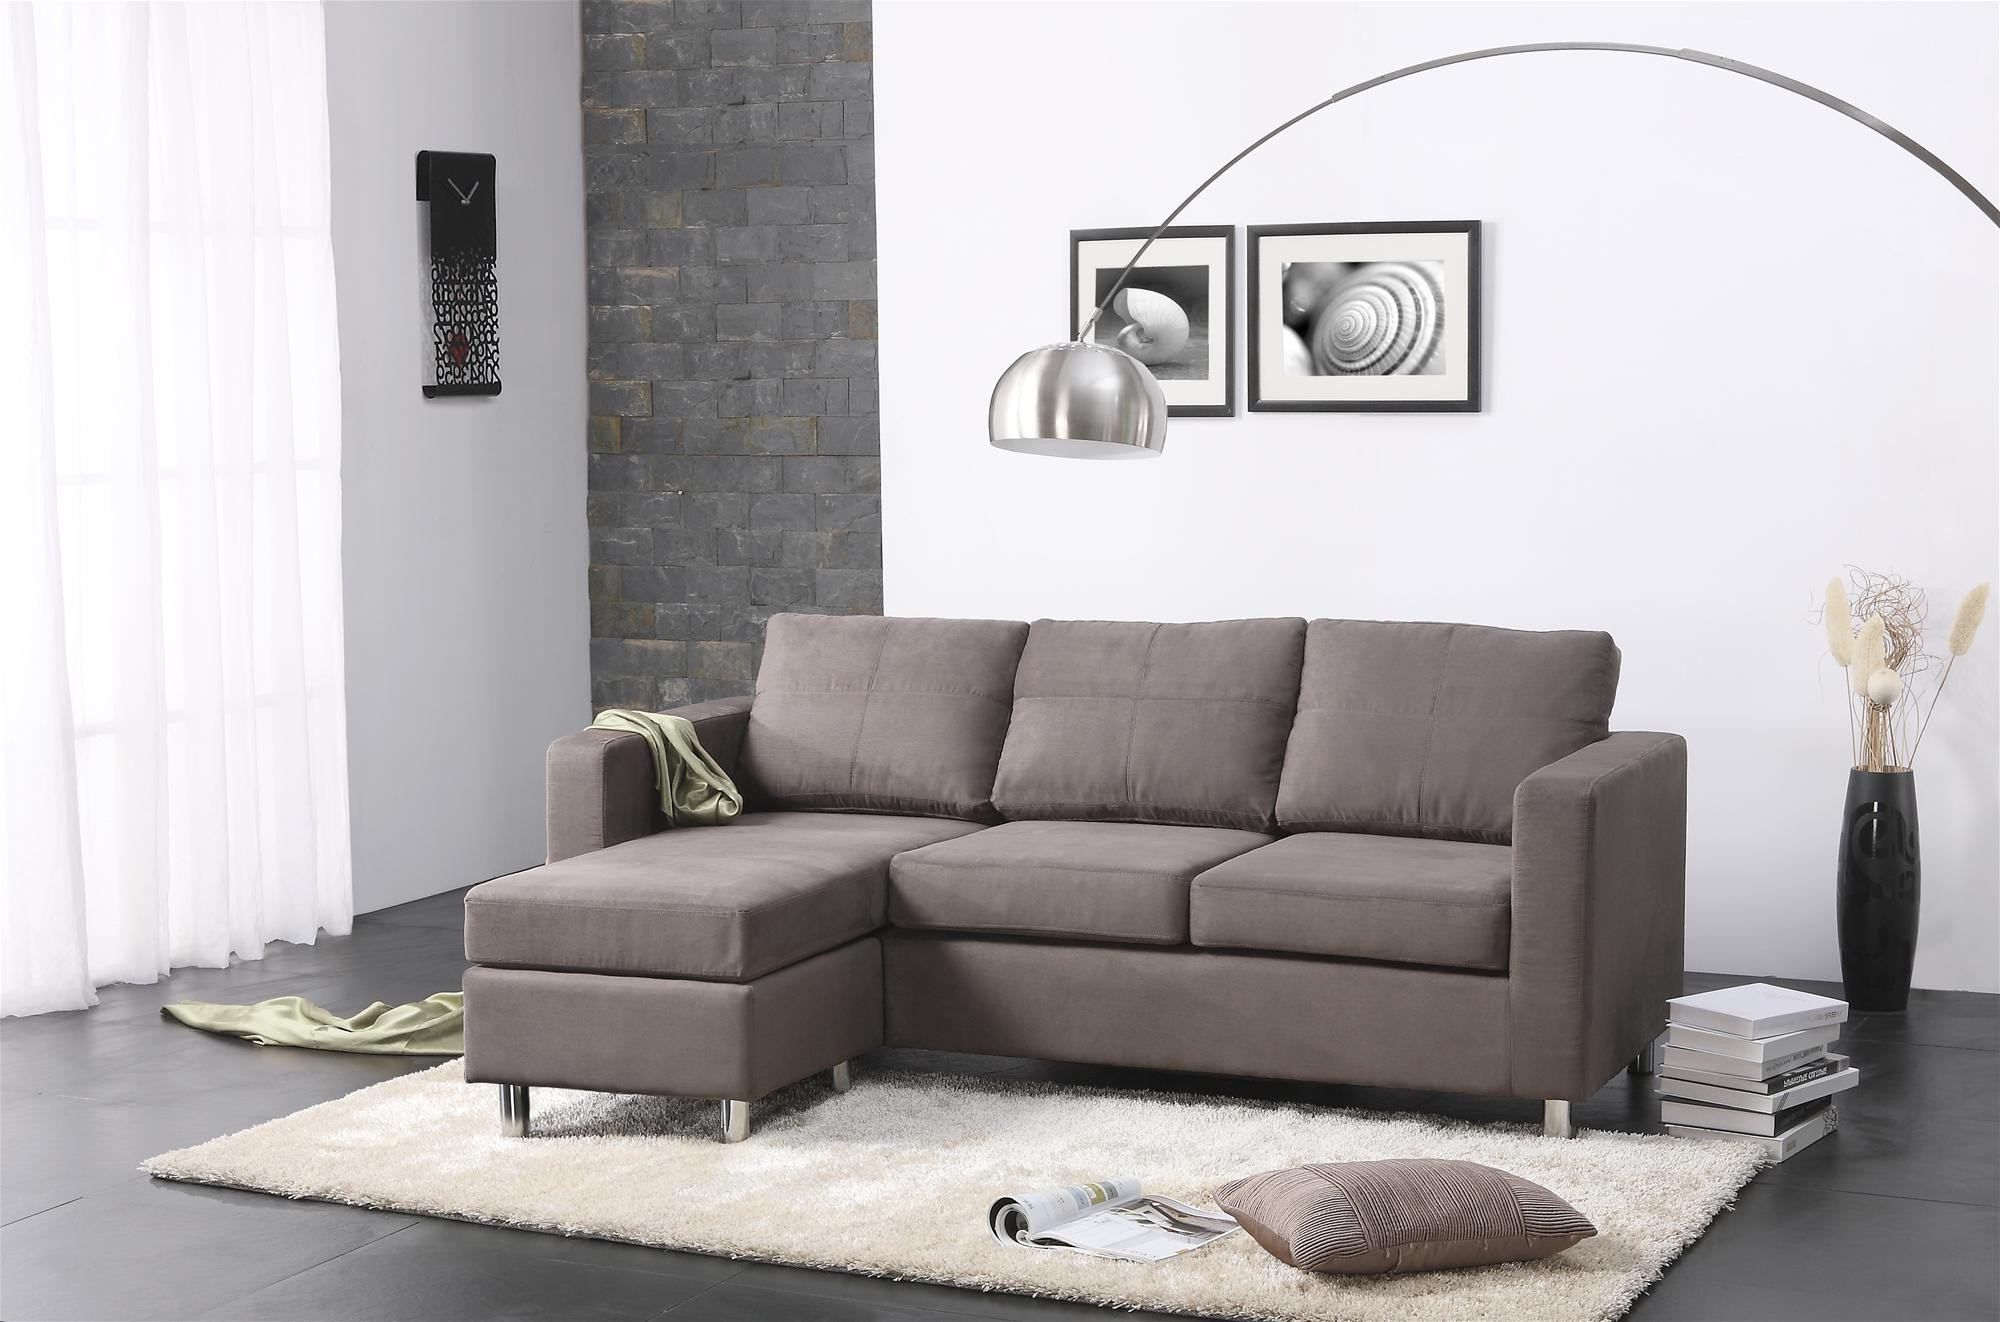 Small Living Room With Sofa Chais